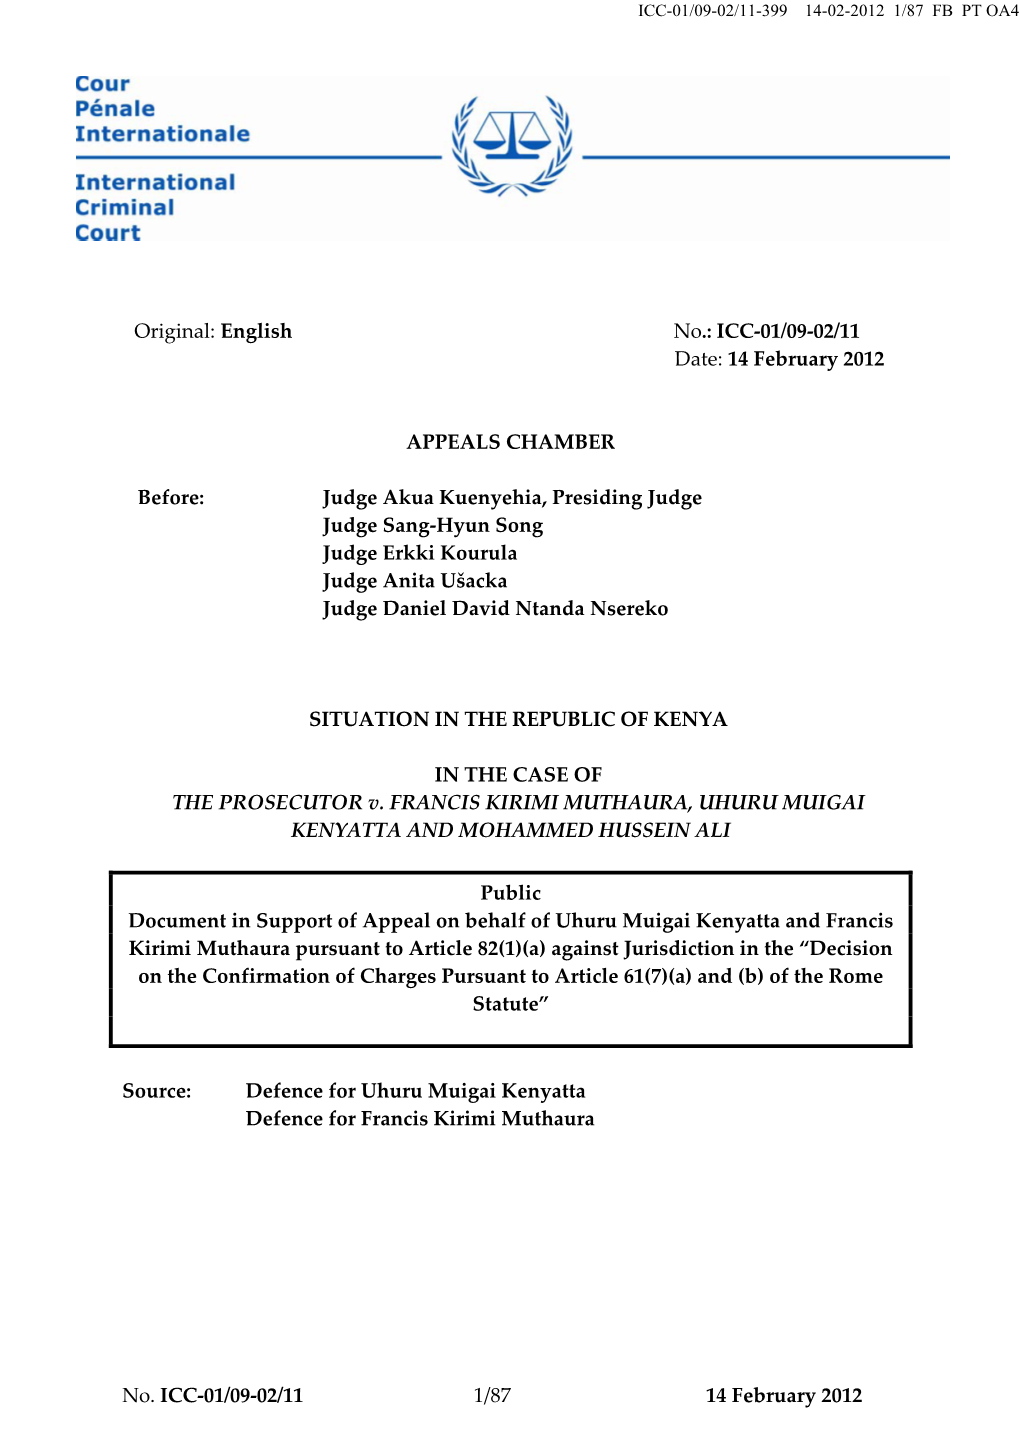 ICC-01/09-02/11 Date: 14 February 2012 APPEALS CHAMBER Before